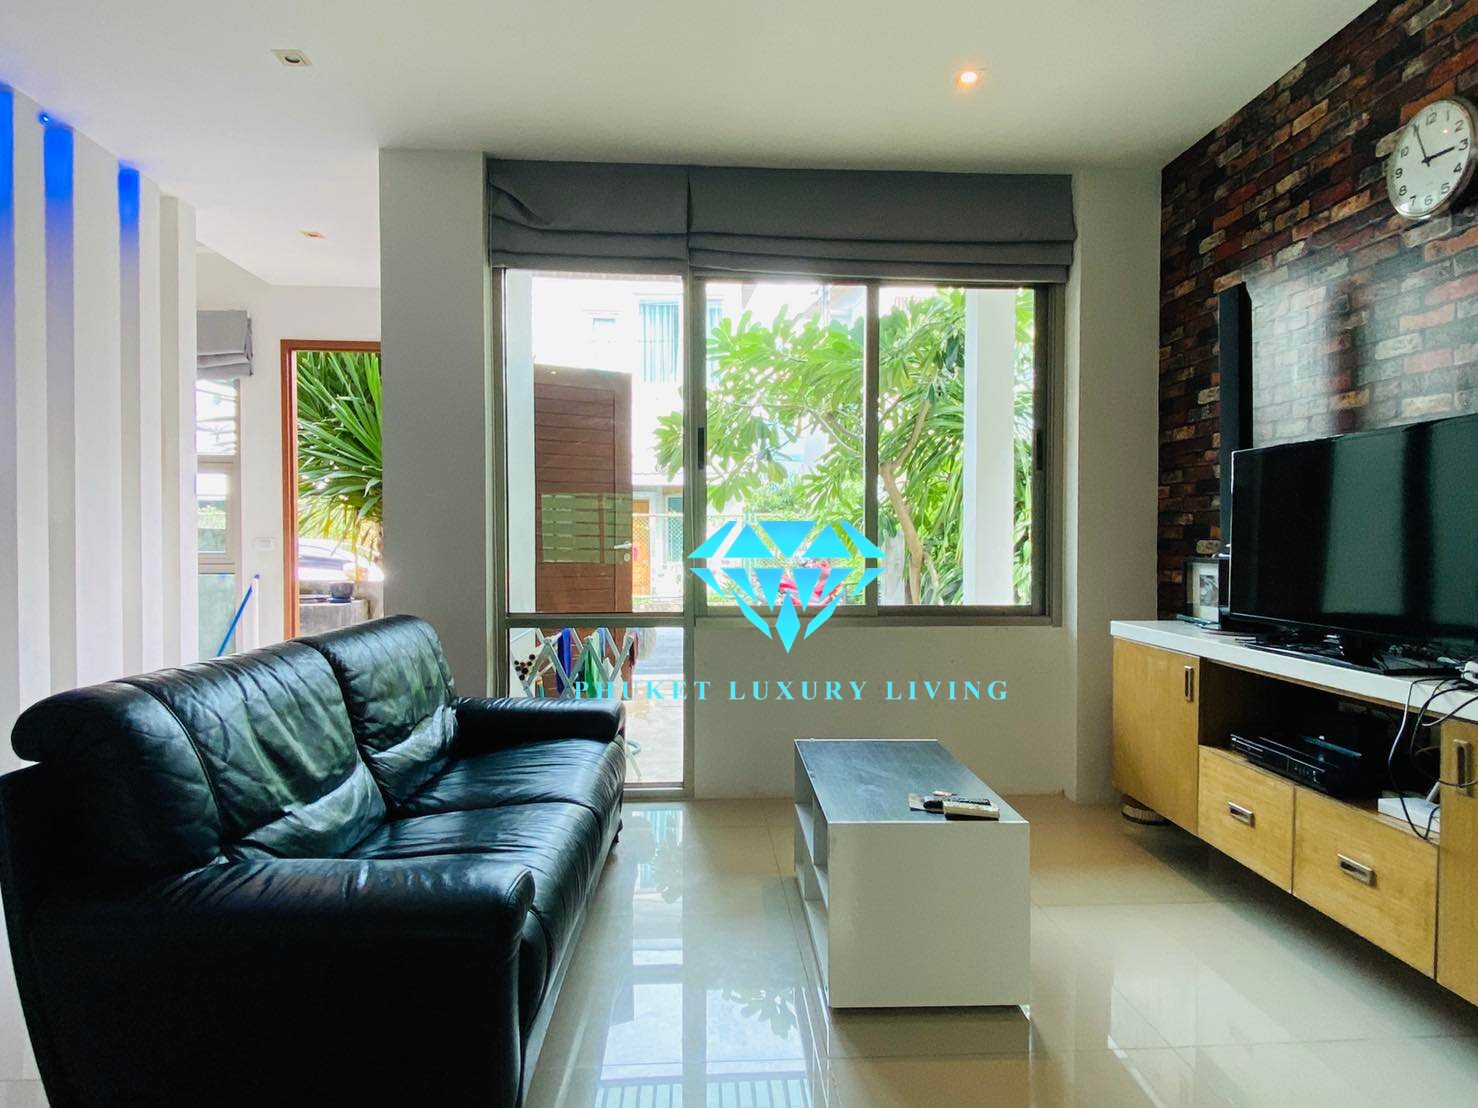 2 bed townhome, Evatown Phuket - For rent & sale